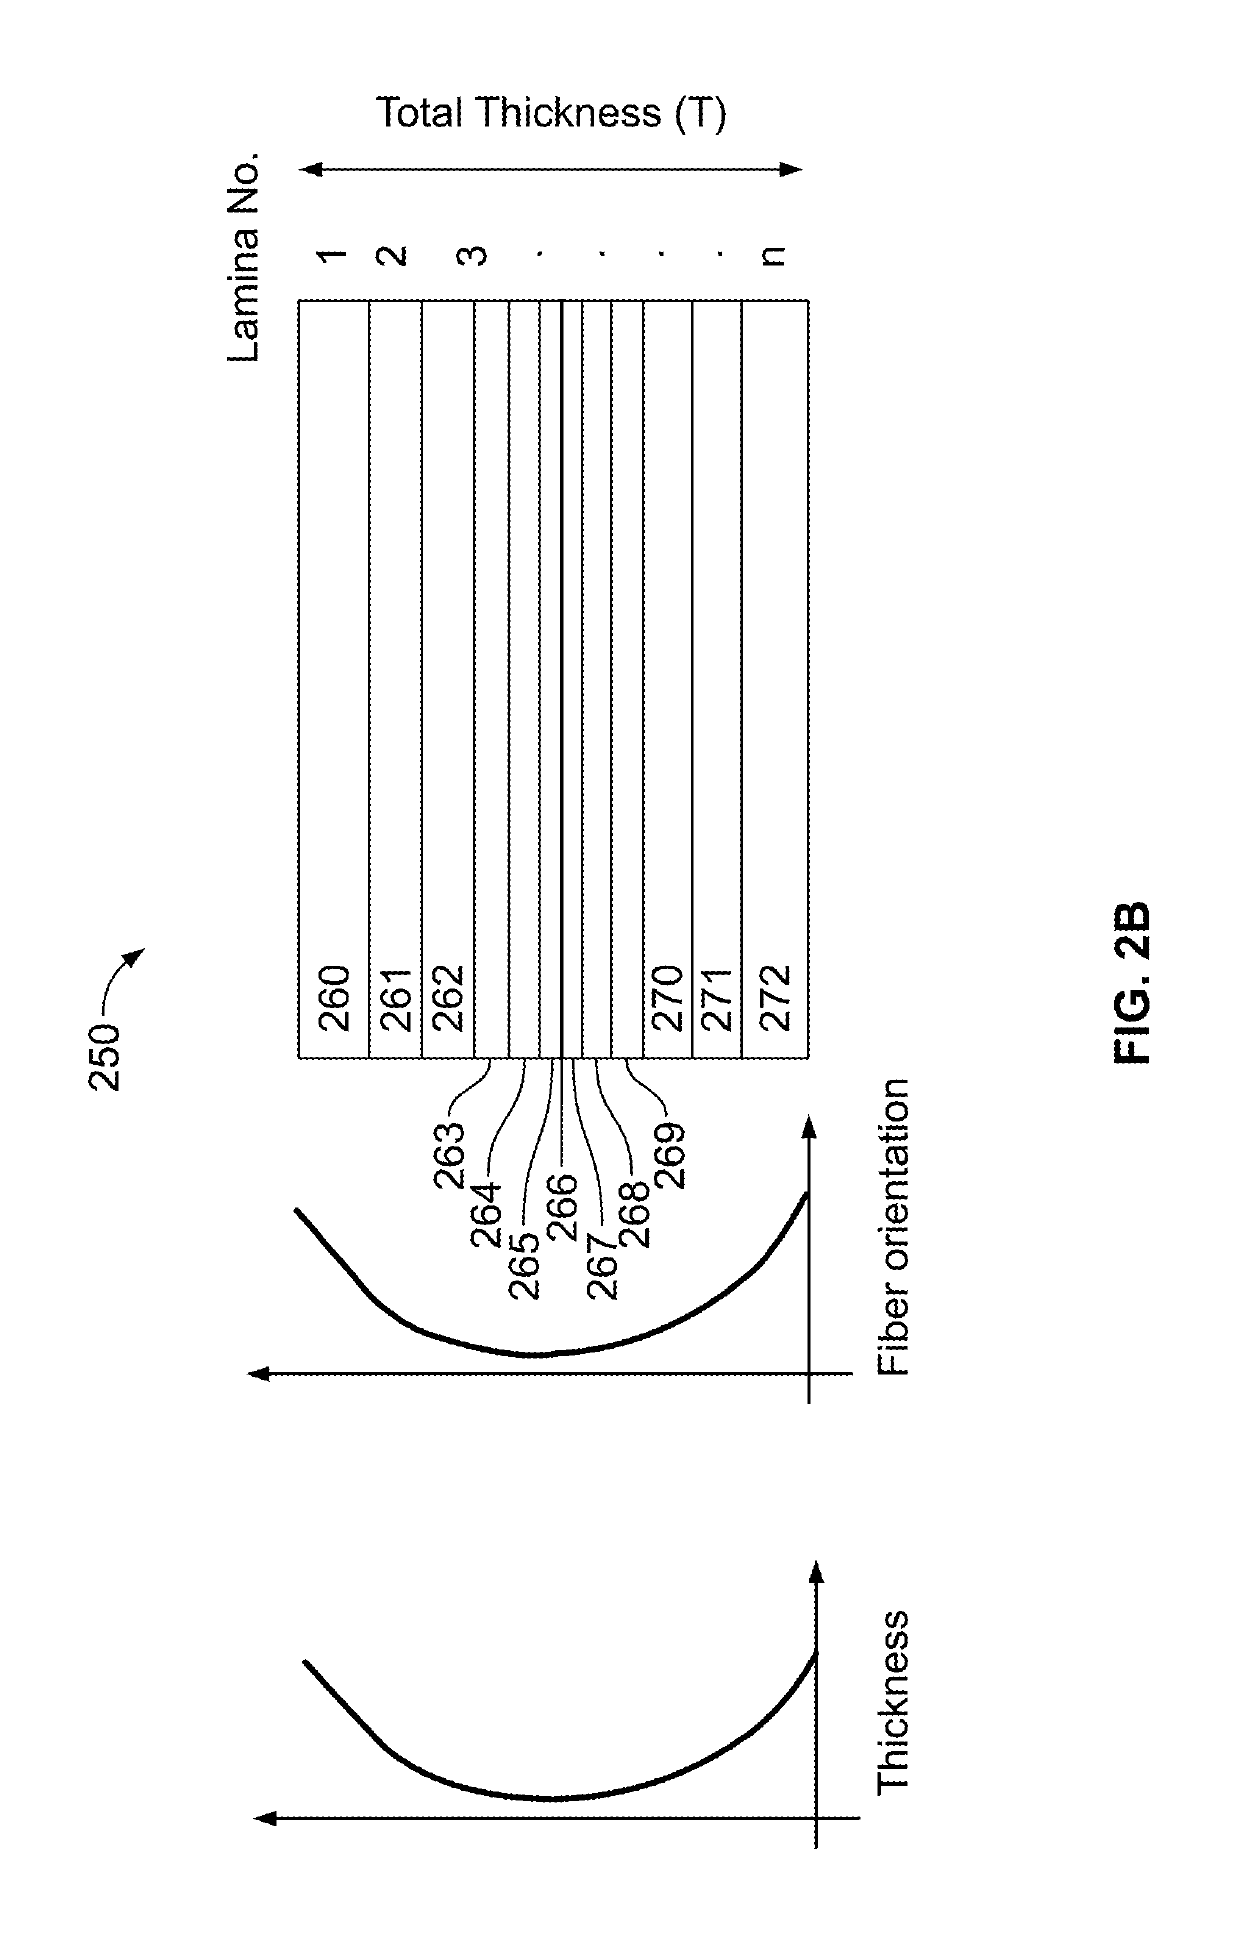 Ductile fiber reinforced polymer plates and bars using mono-type fibers